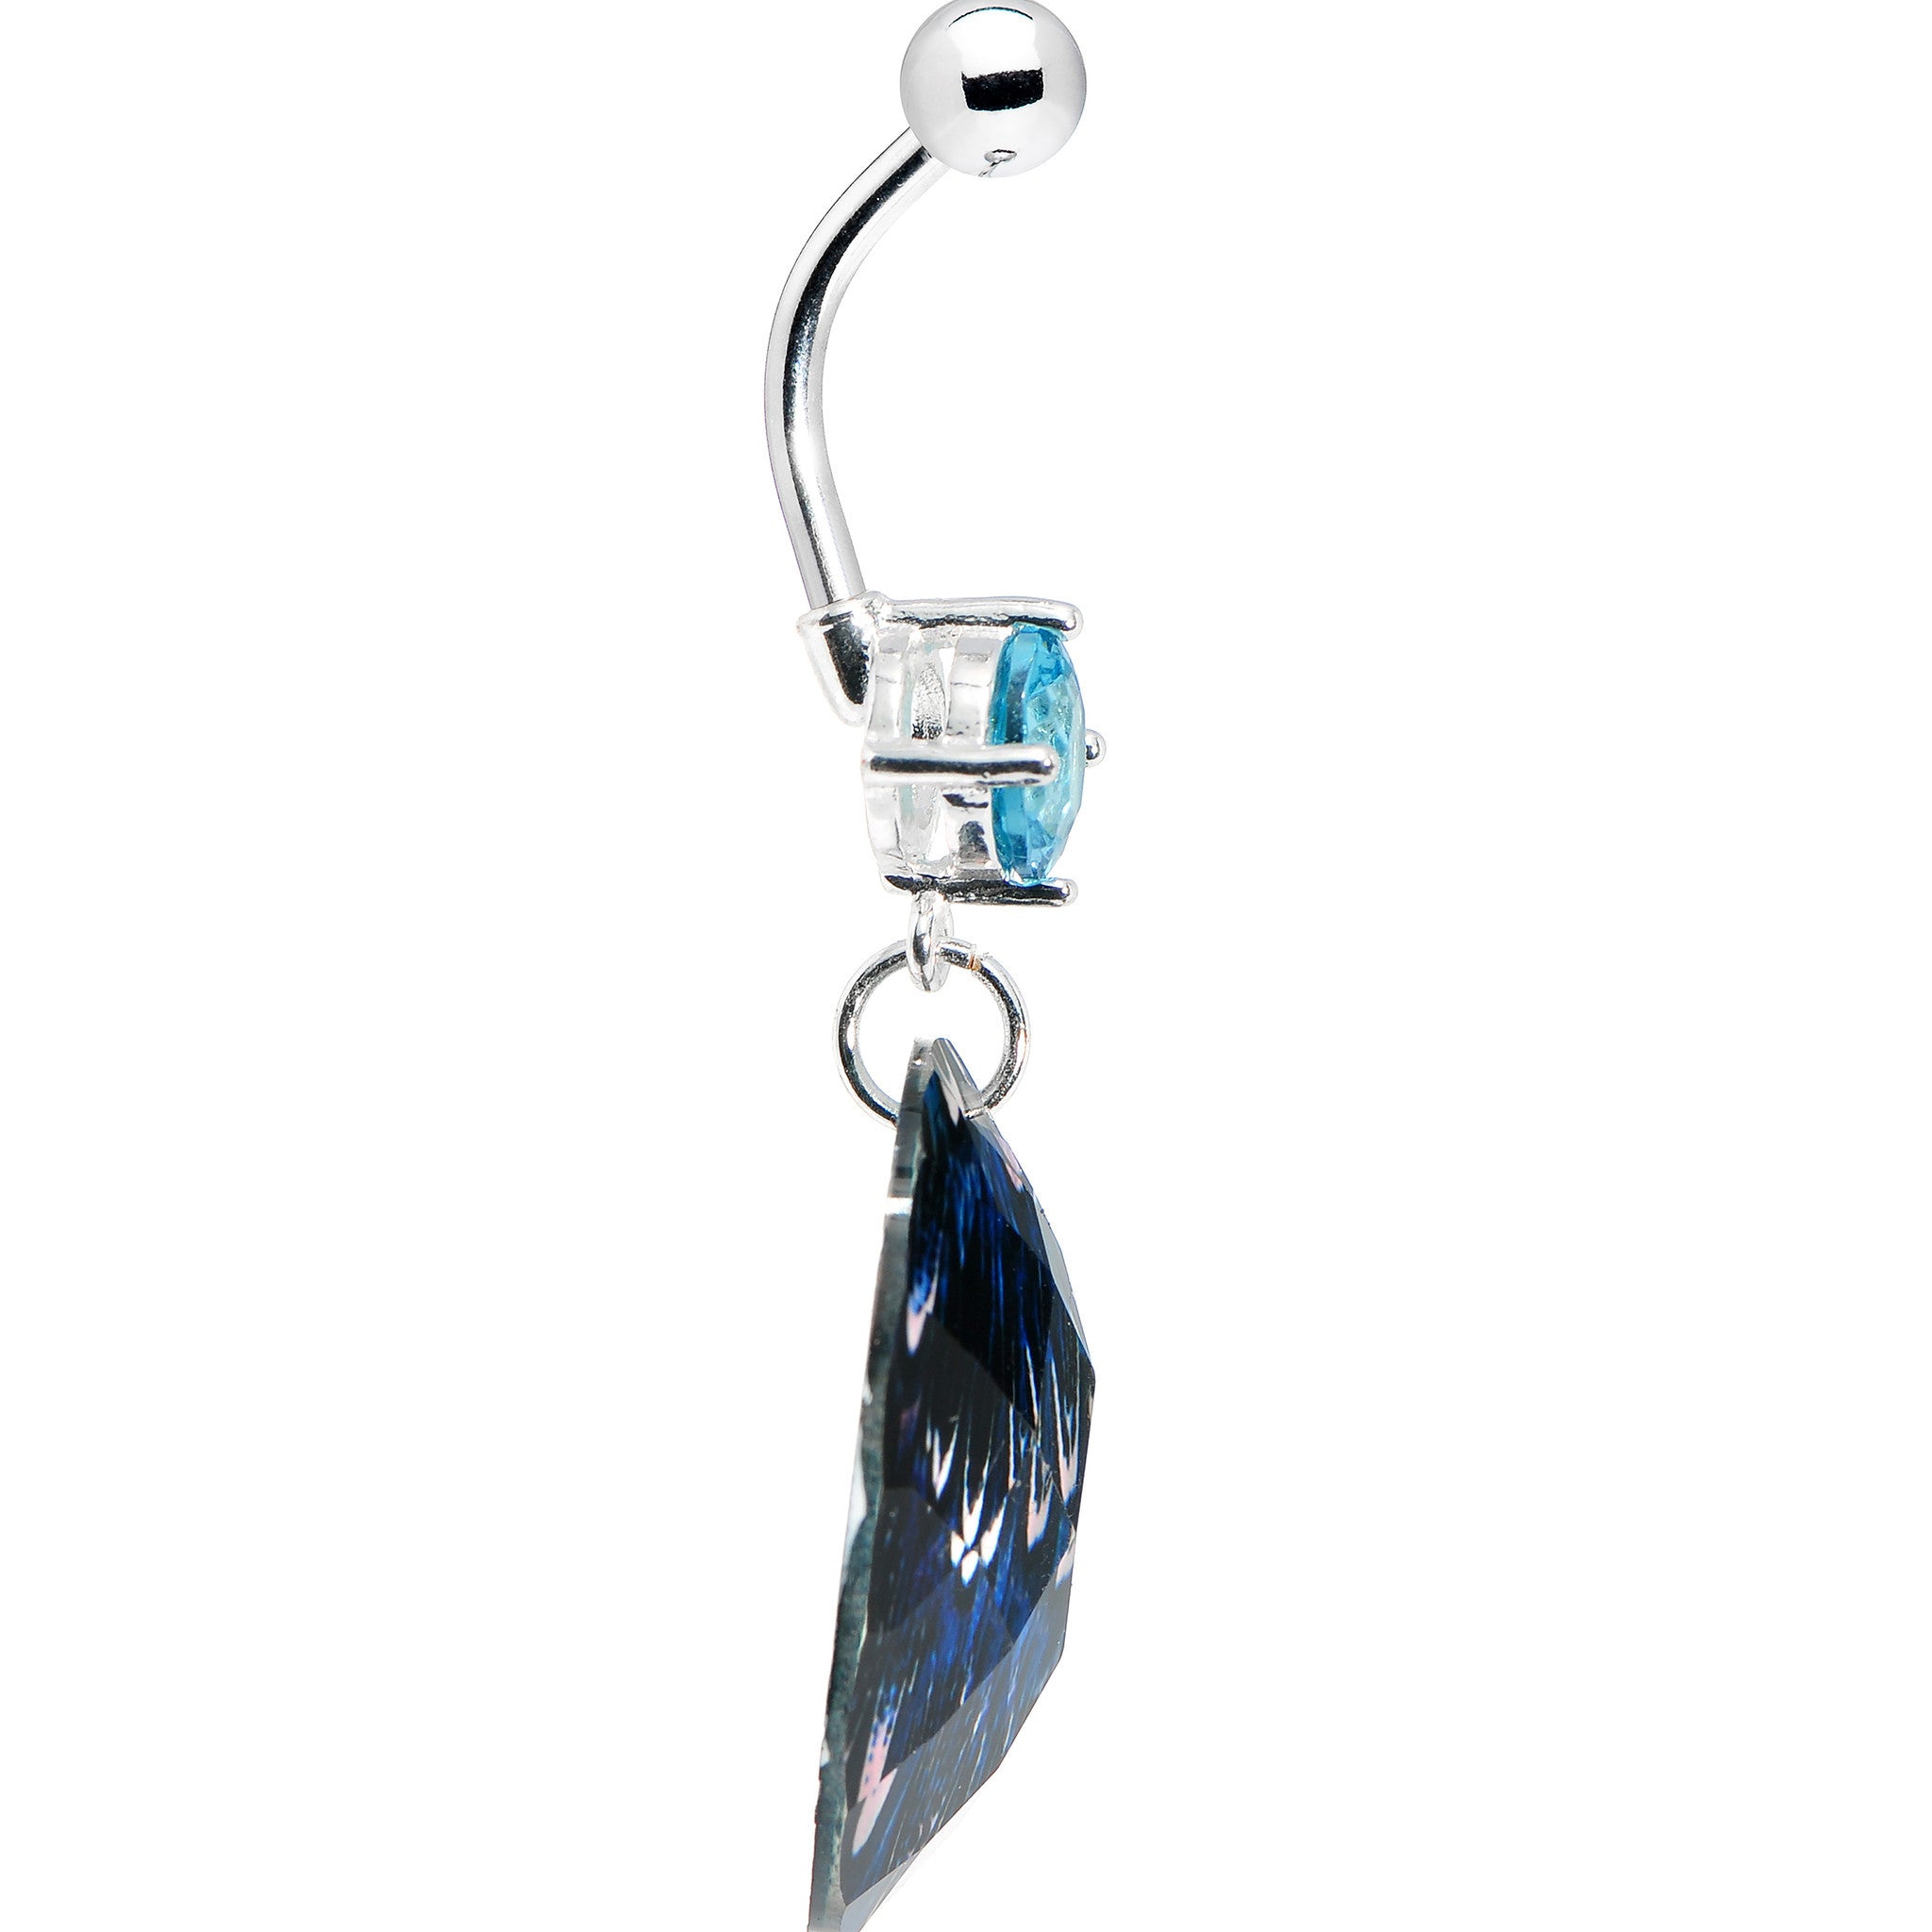 Prong Set Blue Gem Paradise Feather Oval Dangle Belly Ring